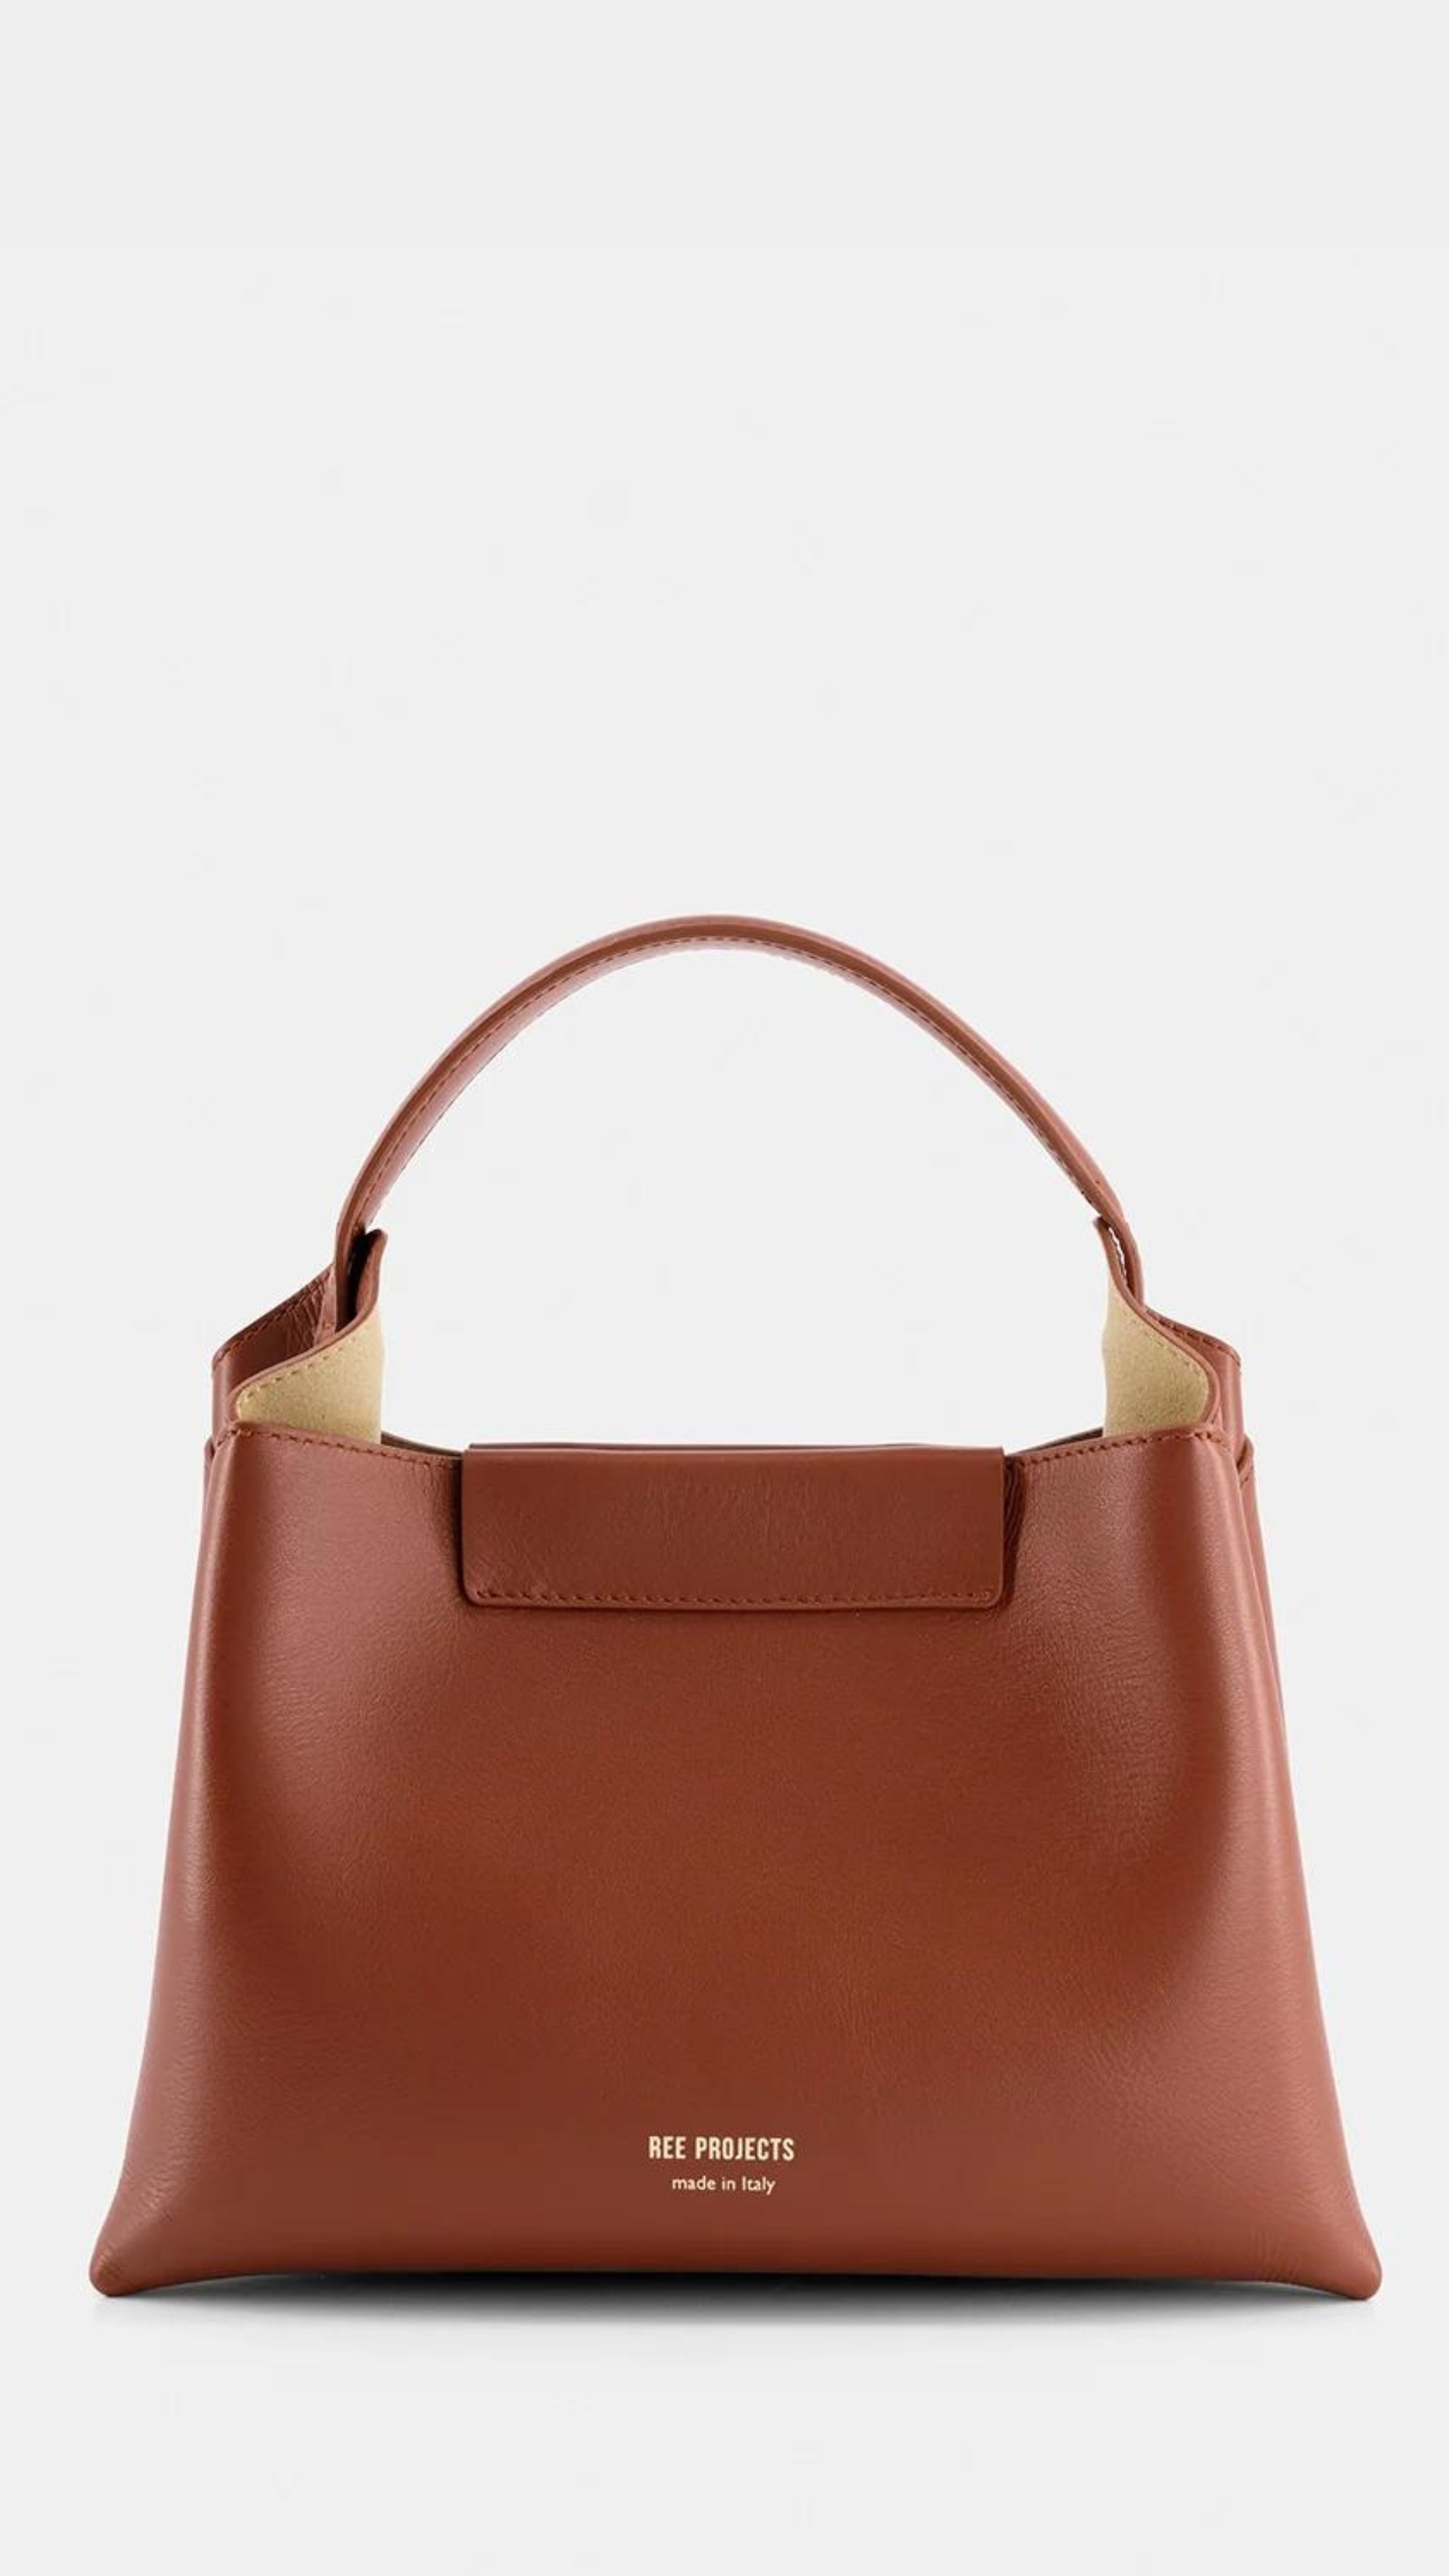 Ree Projects Elize Medium Bag in Cognac Brown. Made in italy and sustainable. Squared shape, it features a magnetic button closure and signature gussets. The purse has a spacious interior, padded top handle, and optional shoulder strap. Shown from the back view.